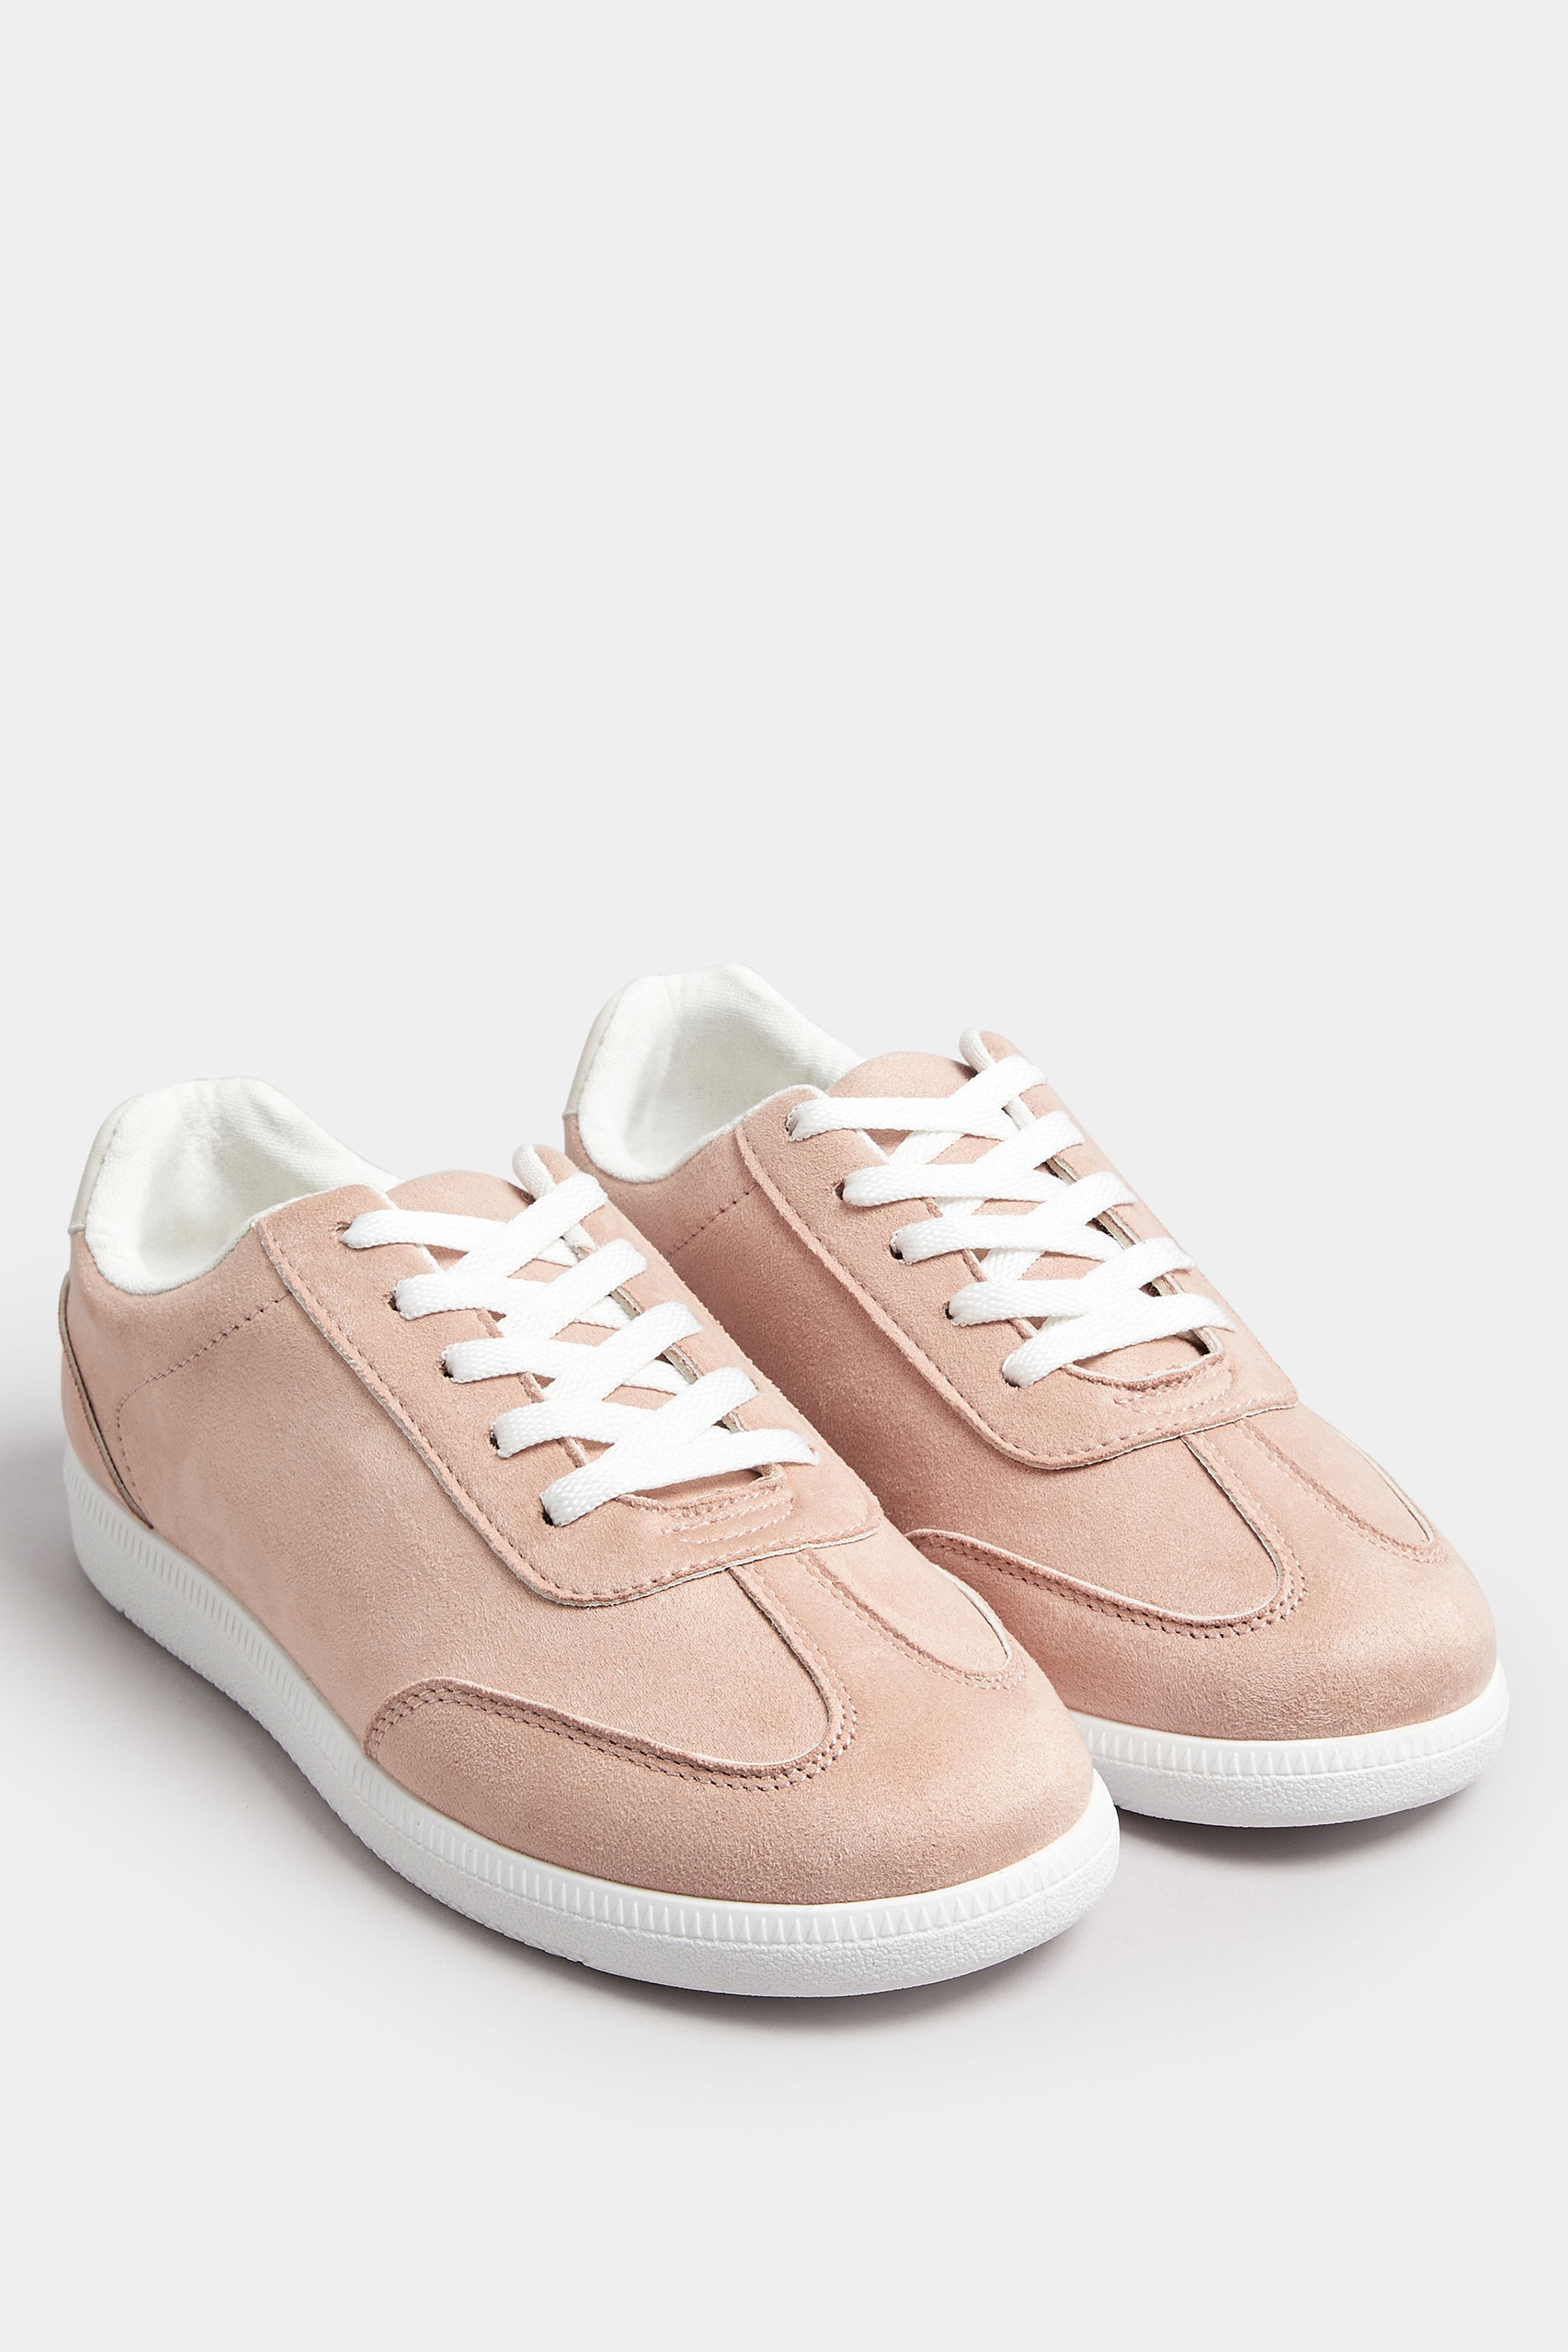 Pink Retro Trainers In Extra Wide EEE Fit | Yours Clothing 2